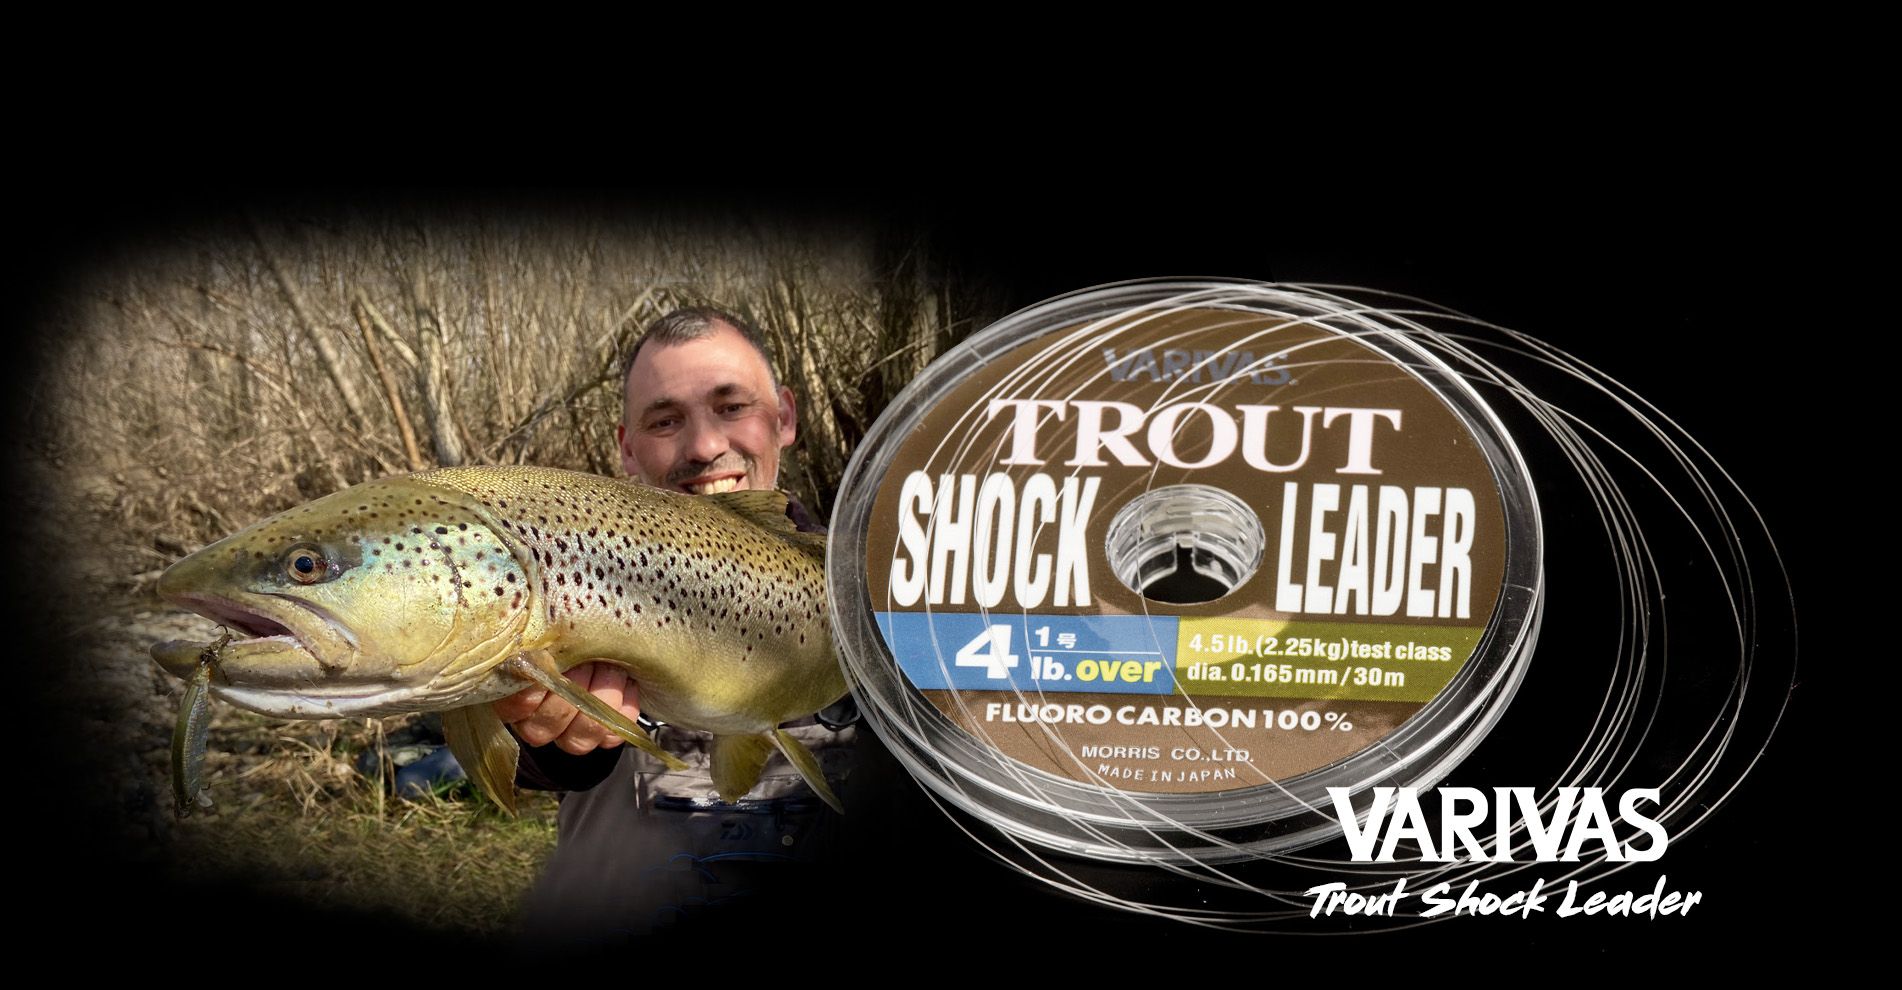 Trout Shock Leader – Way Of Fishing